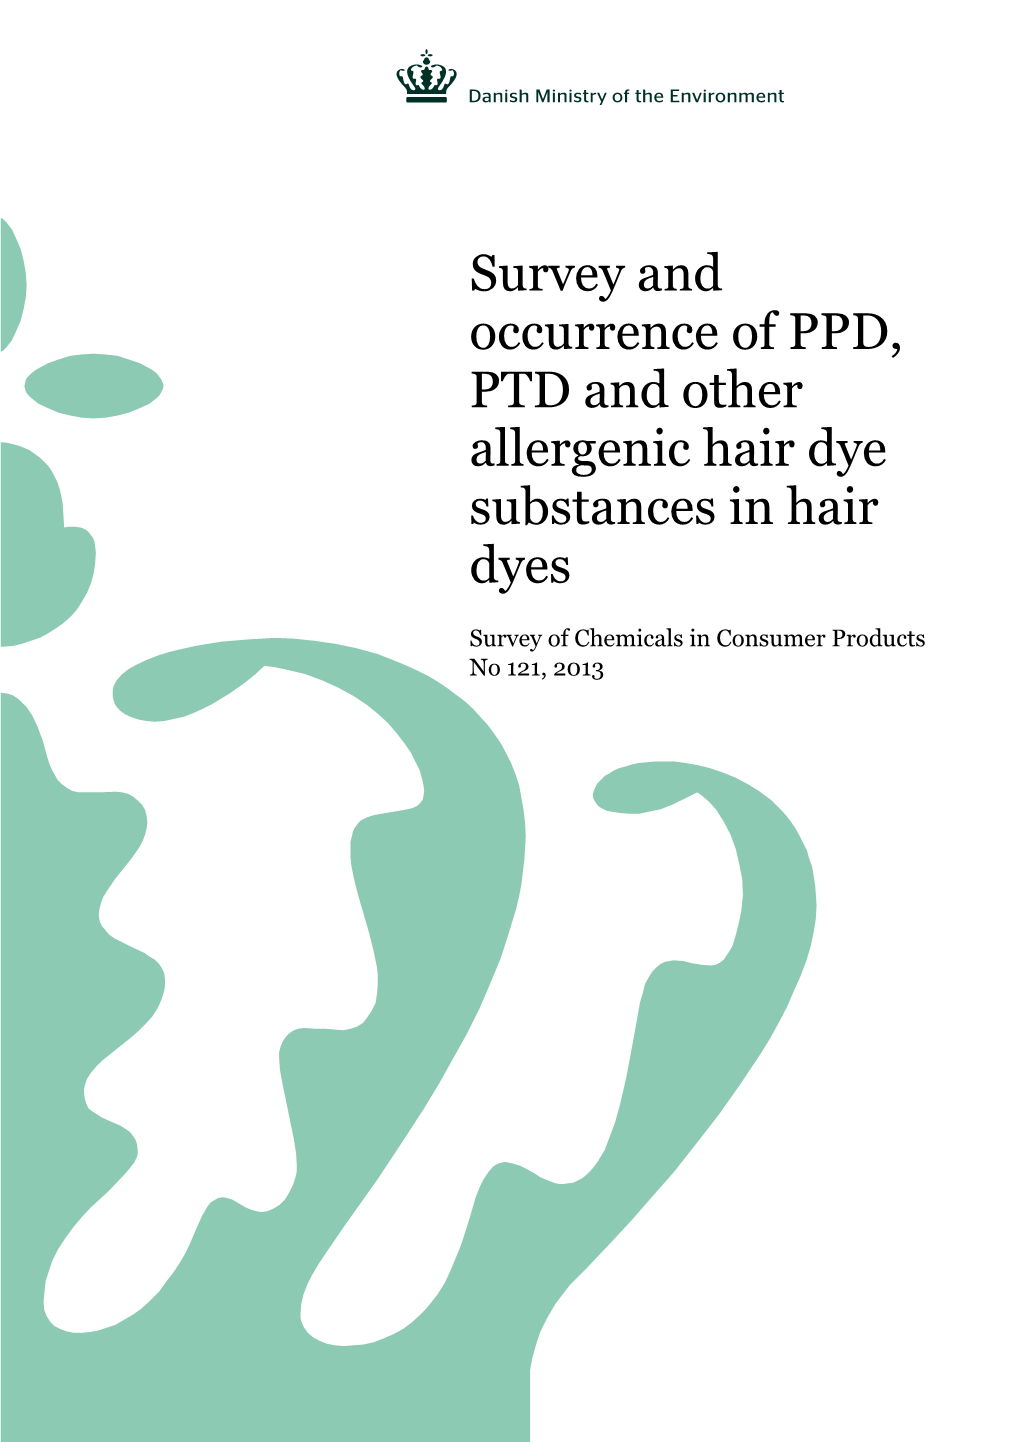 Survey and Occurrence of PPD, PTD and Other Allergenic Hair Dye Substances in Hair Dyes